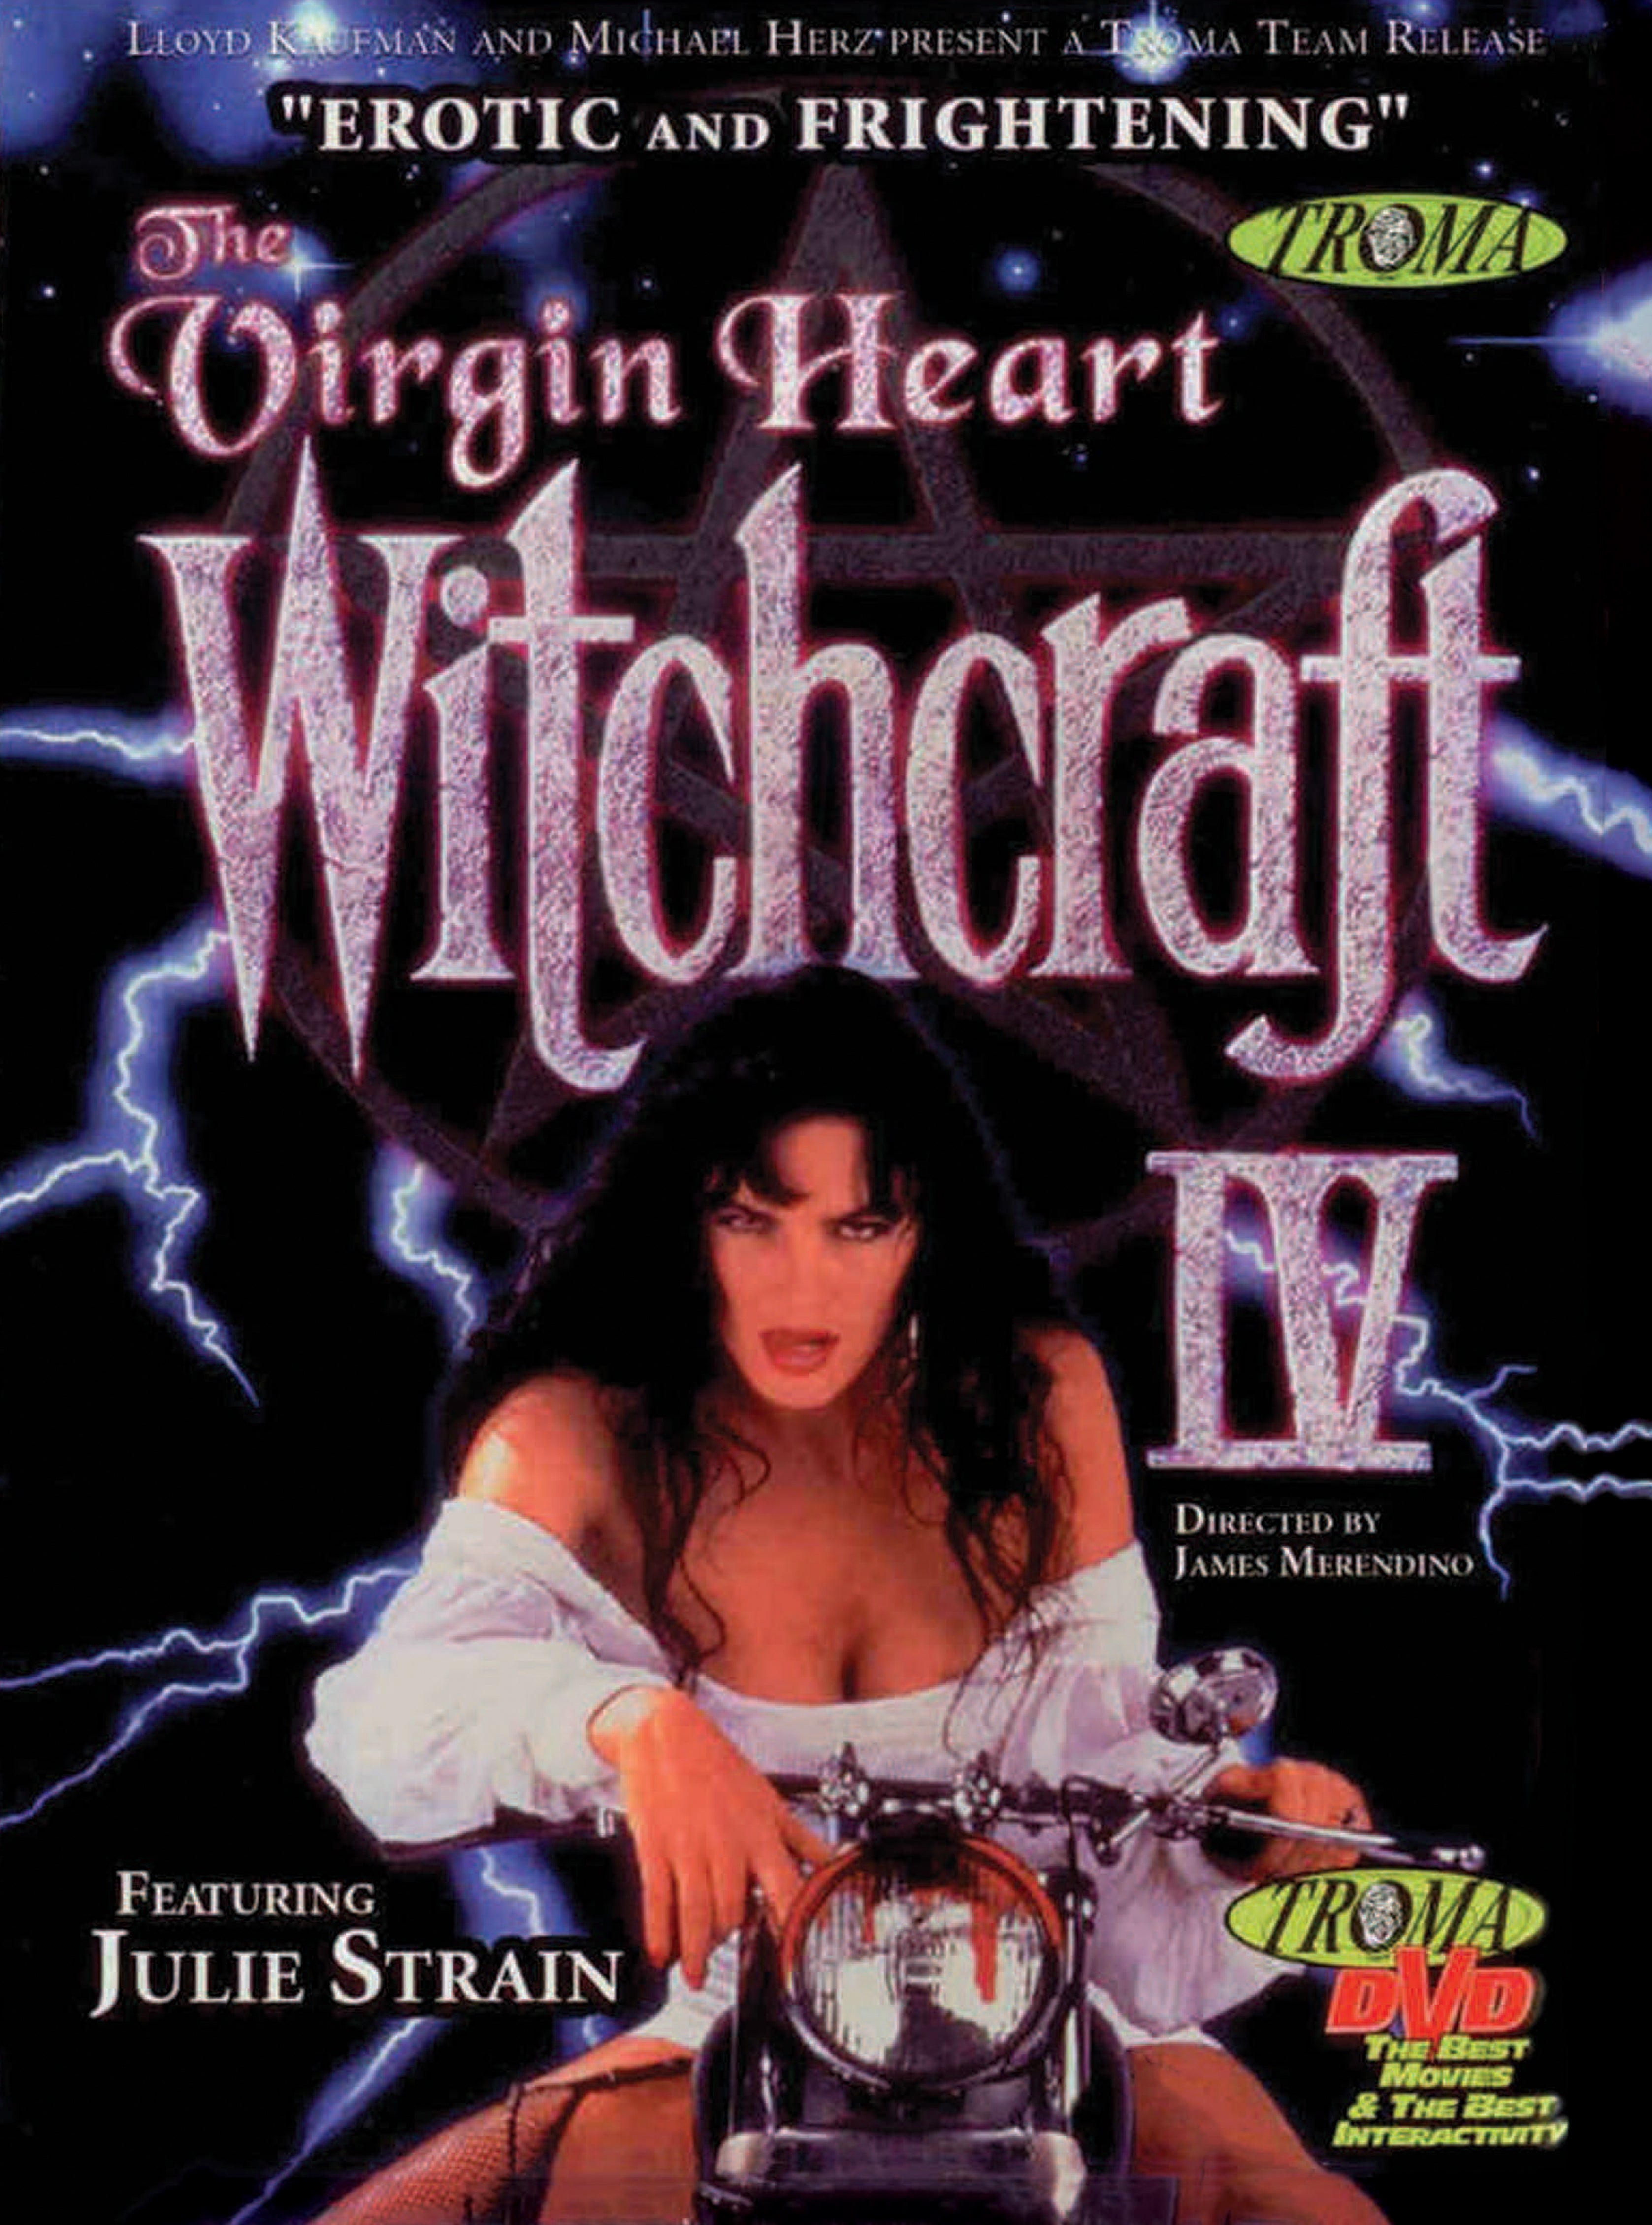 WITCHCRAFT IV: THE VIRGIN HEART DVD